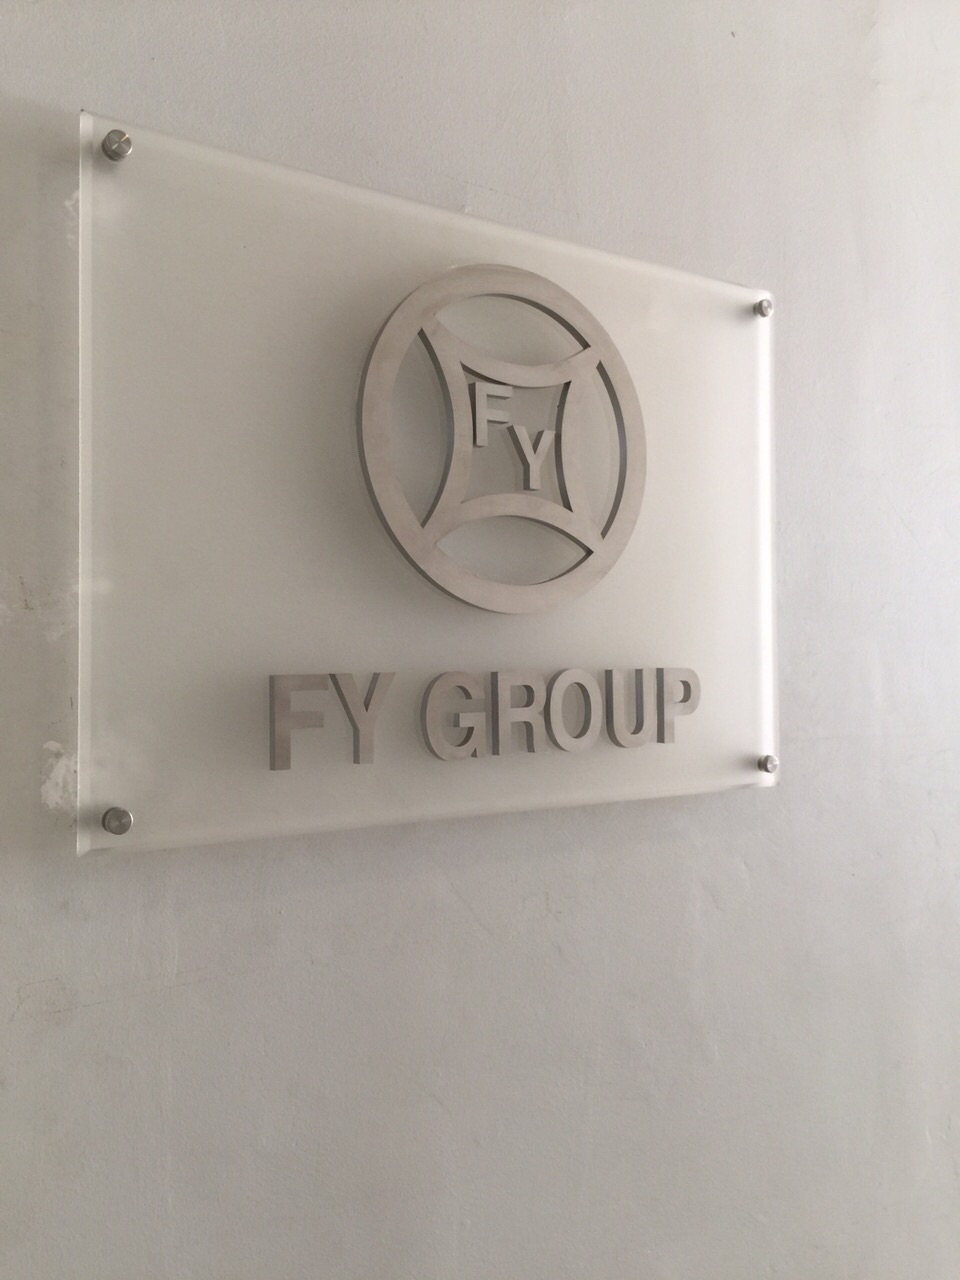 FY Group